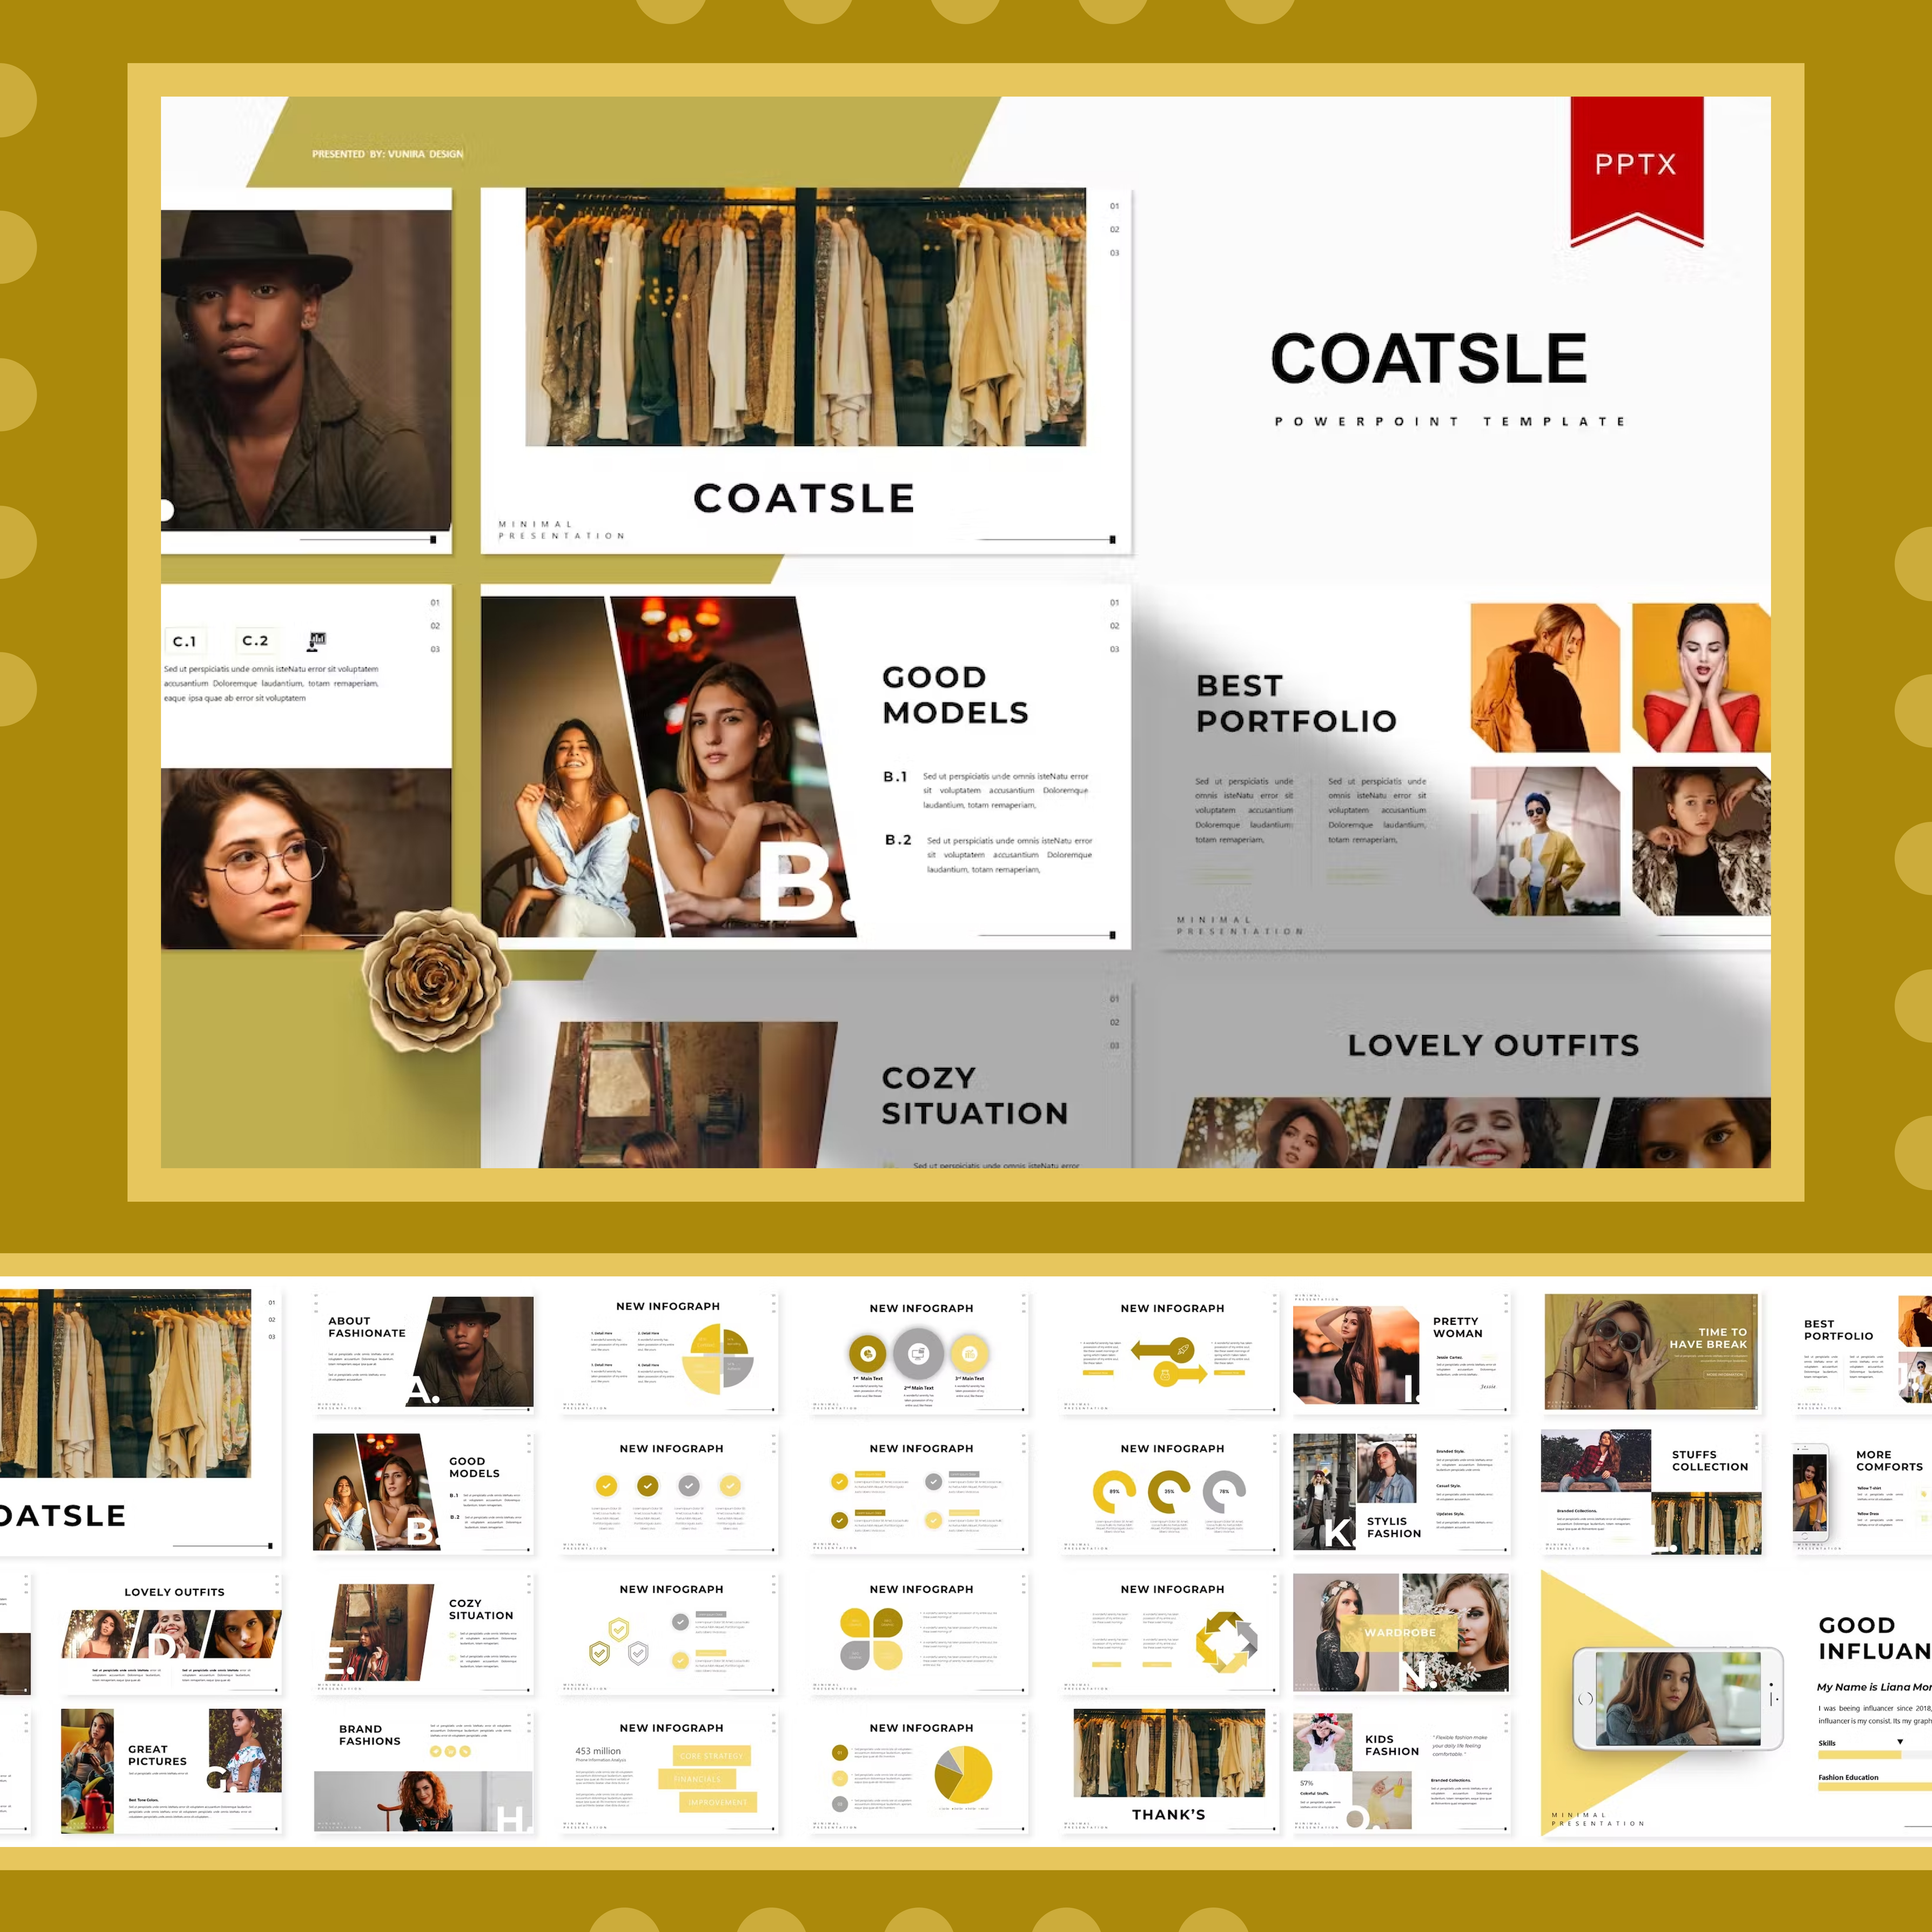 Images with coatsle powerpoint template.